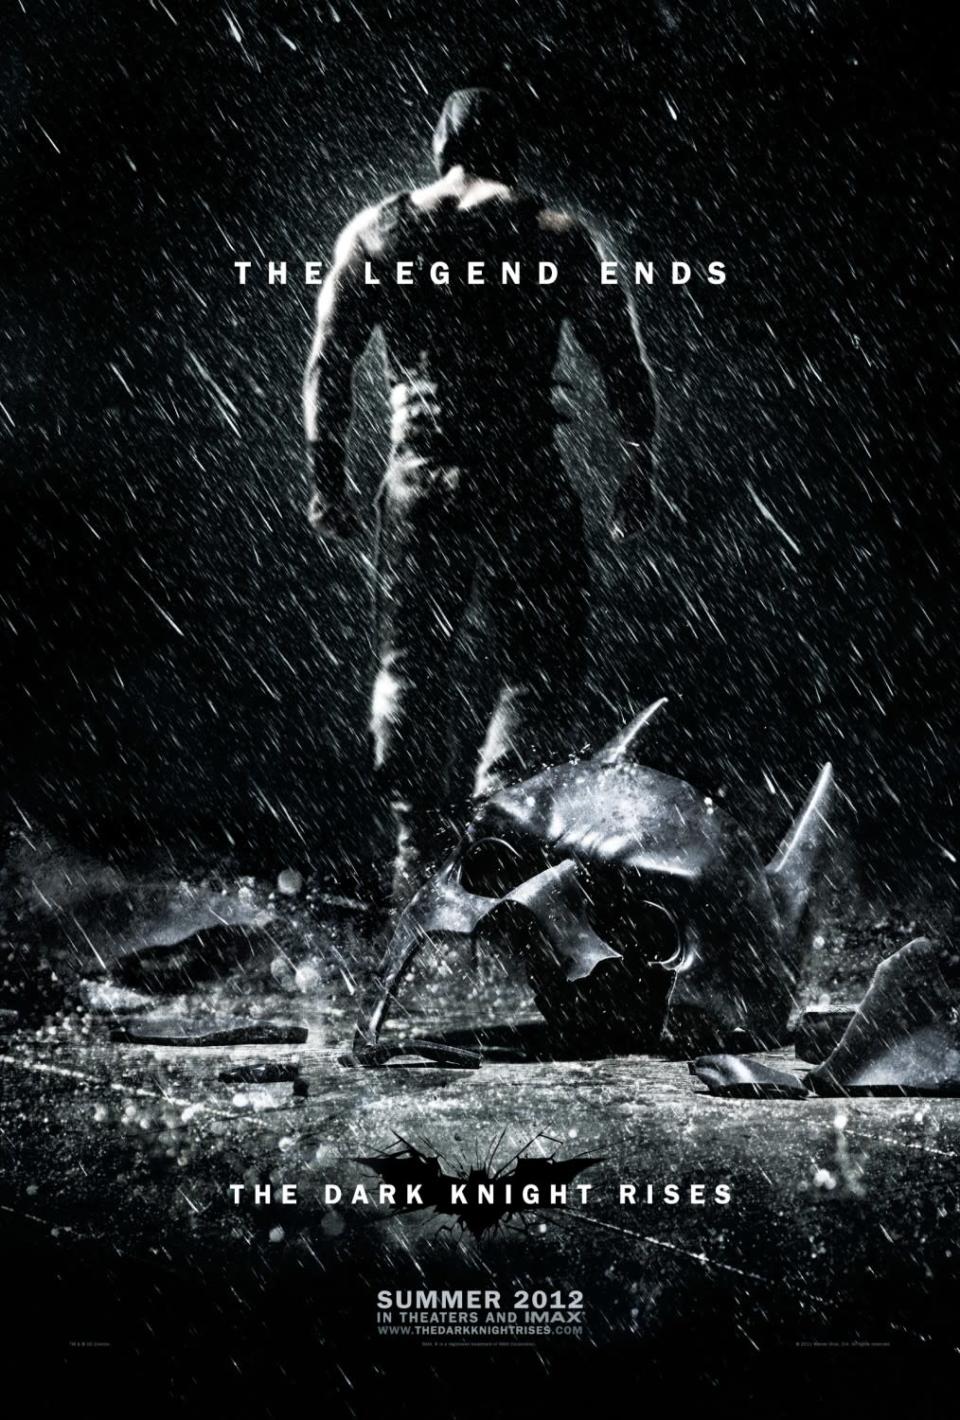 Best and Worst Movie Posters 2012  The Dark Knight Rises